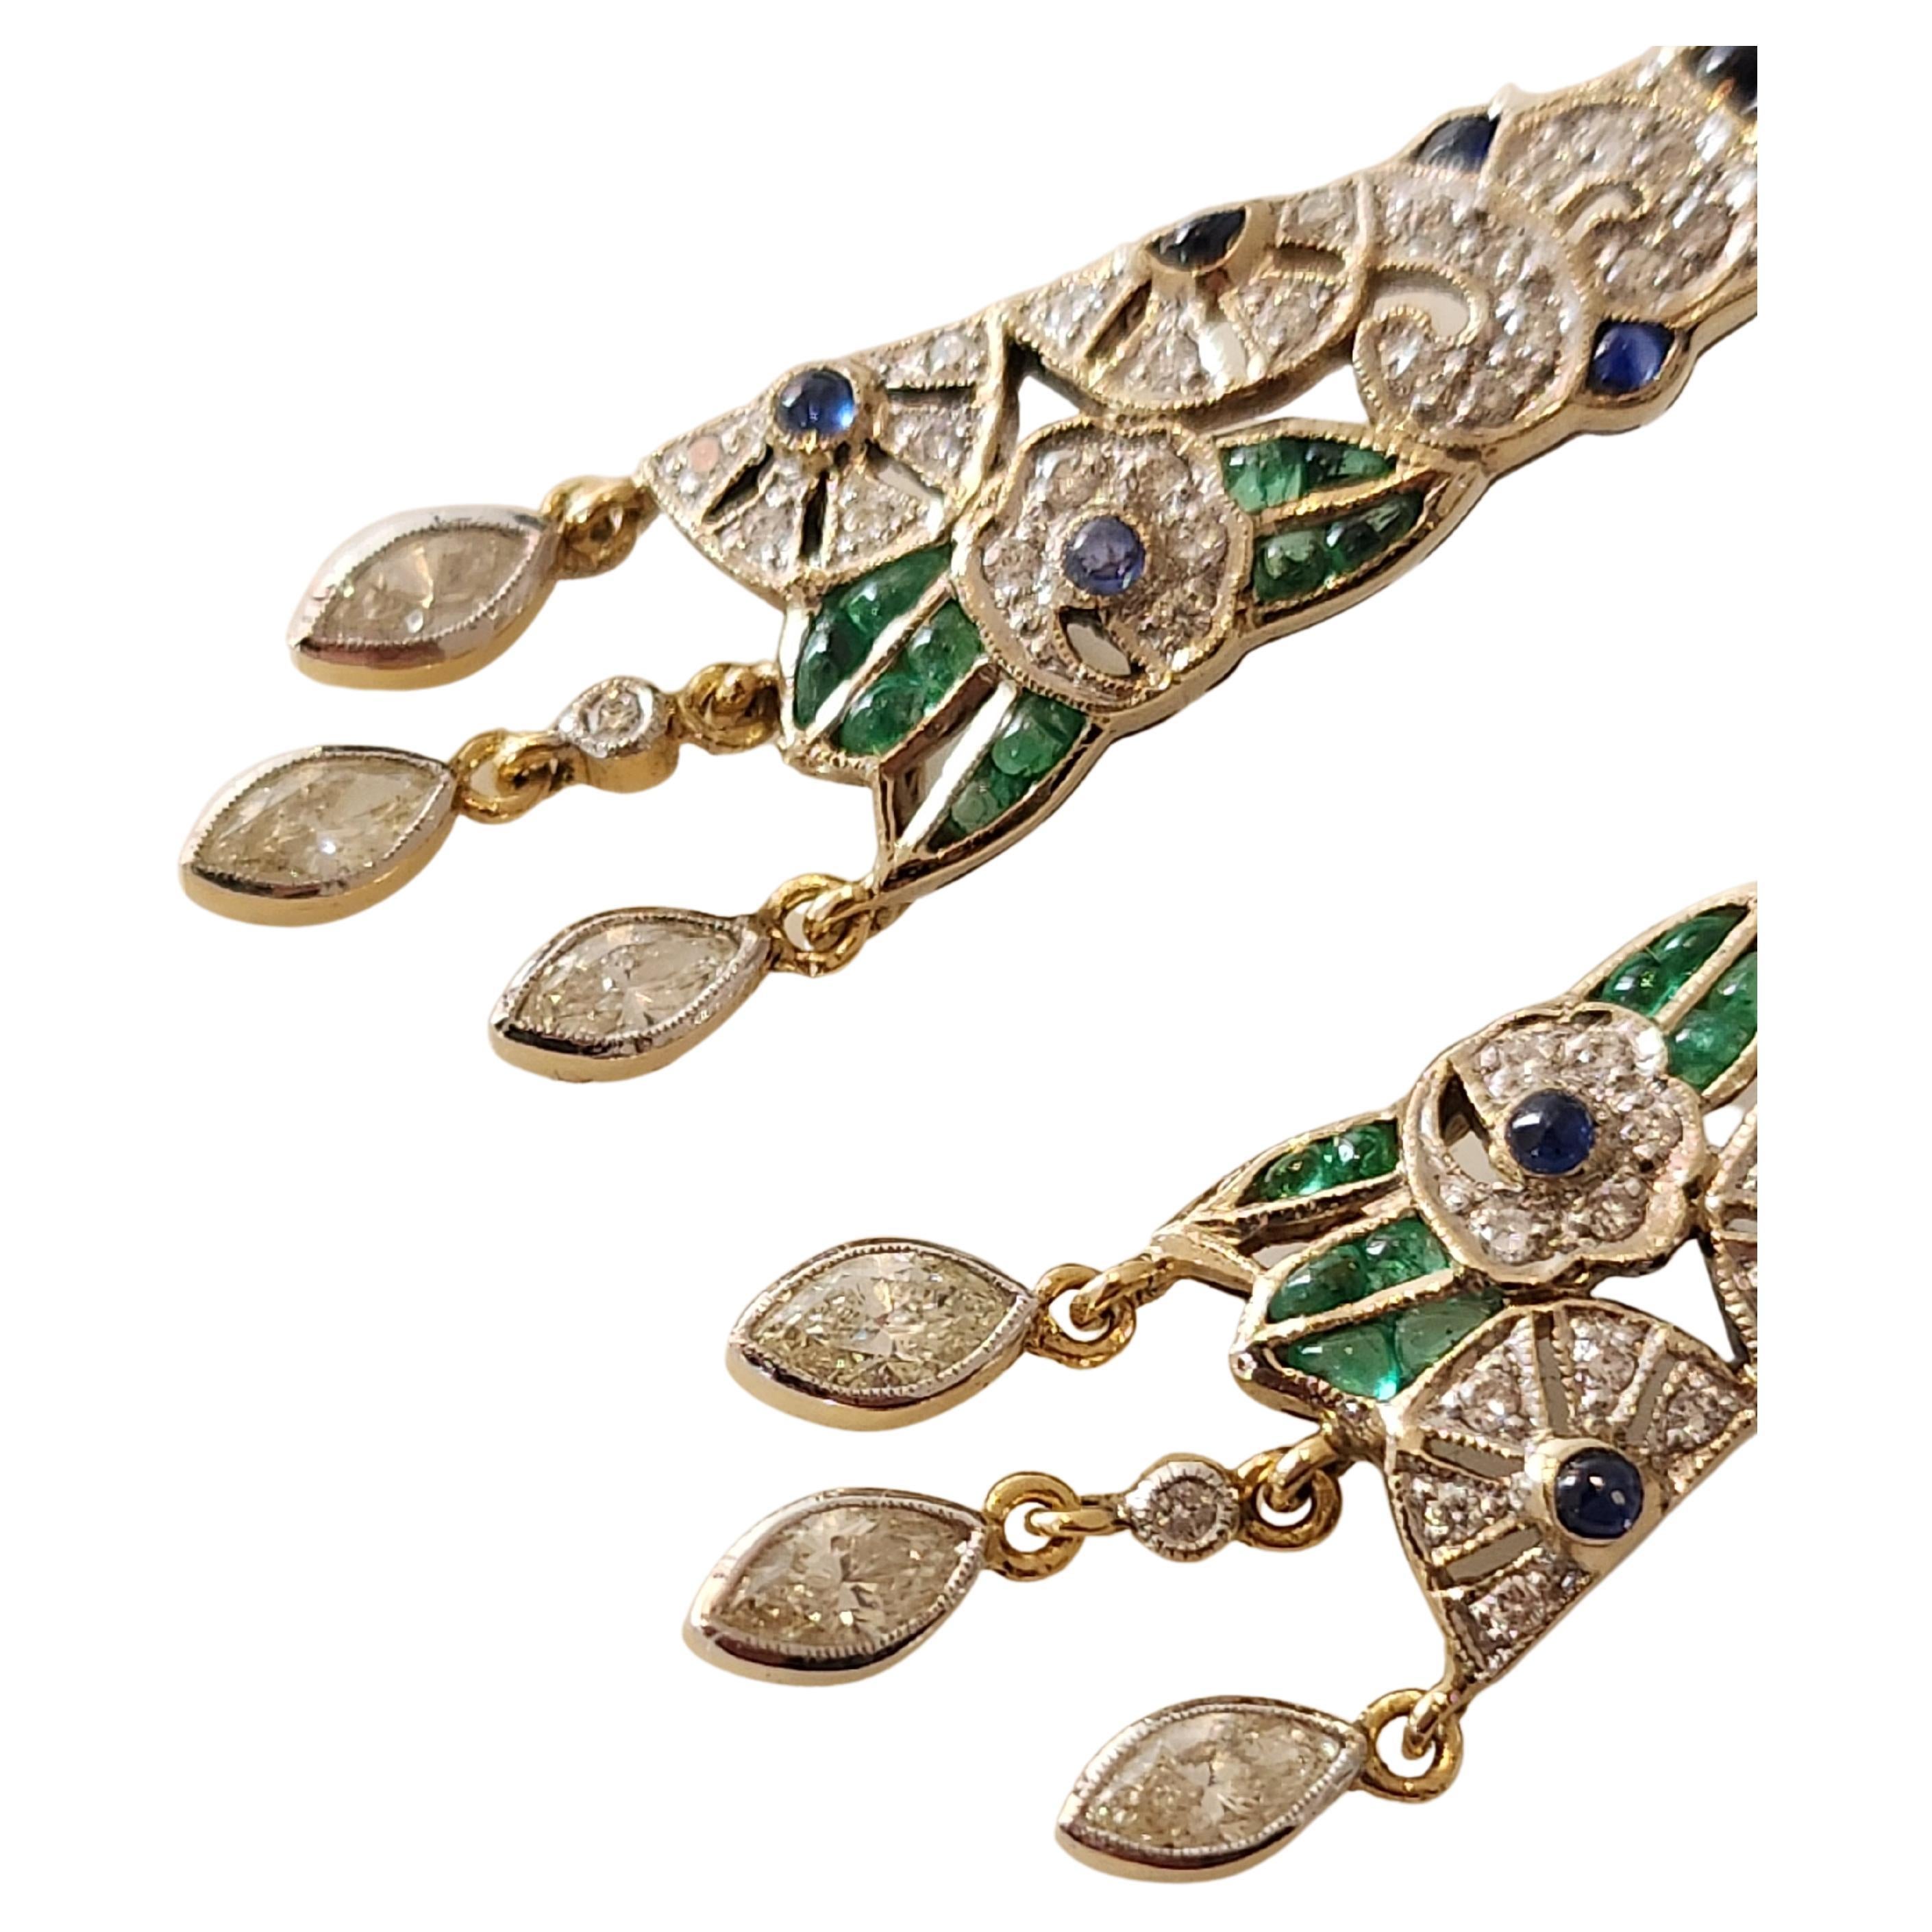 Art deco diamond earrings in 18k gold setting decorted with brilliant cut diamonds green emeralds and blue sapphire in geomatric and ornamental designe comprised of 6 navvet diamonds and 69 brilliant cut diamonds over all weight 1.20 carats and 24